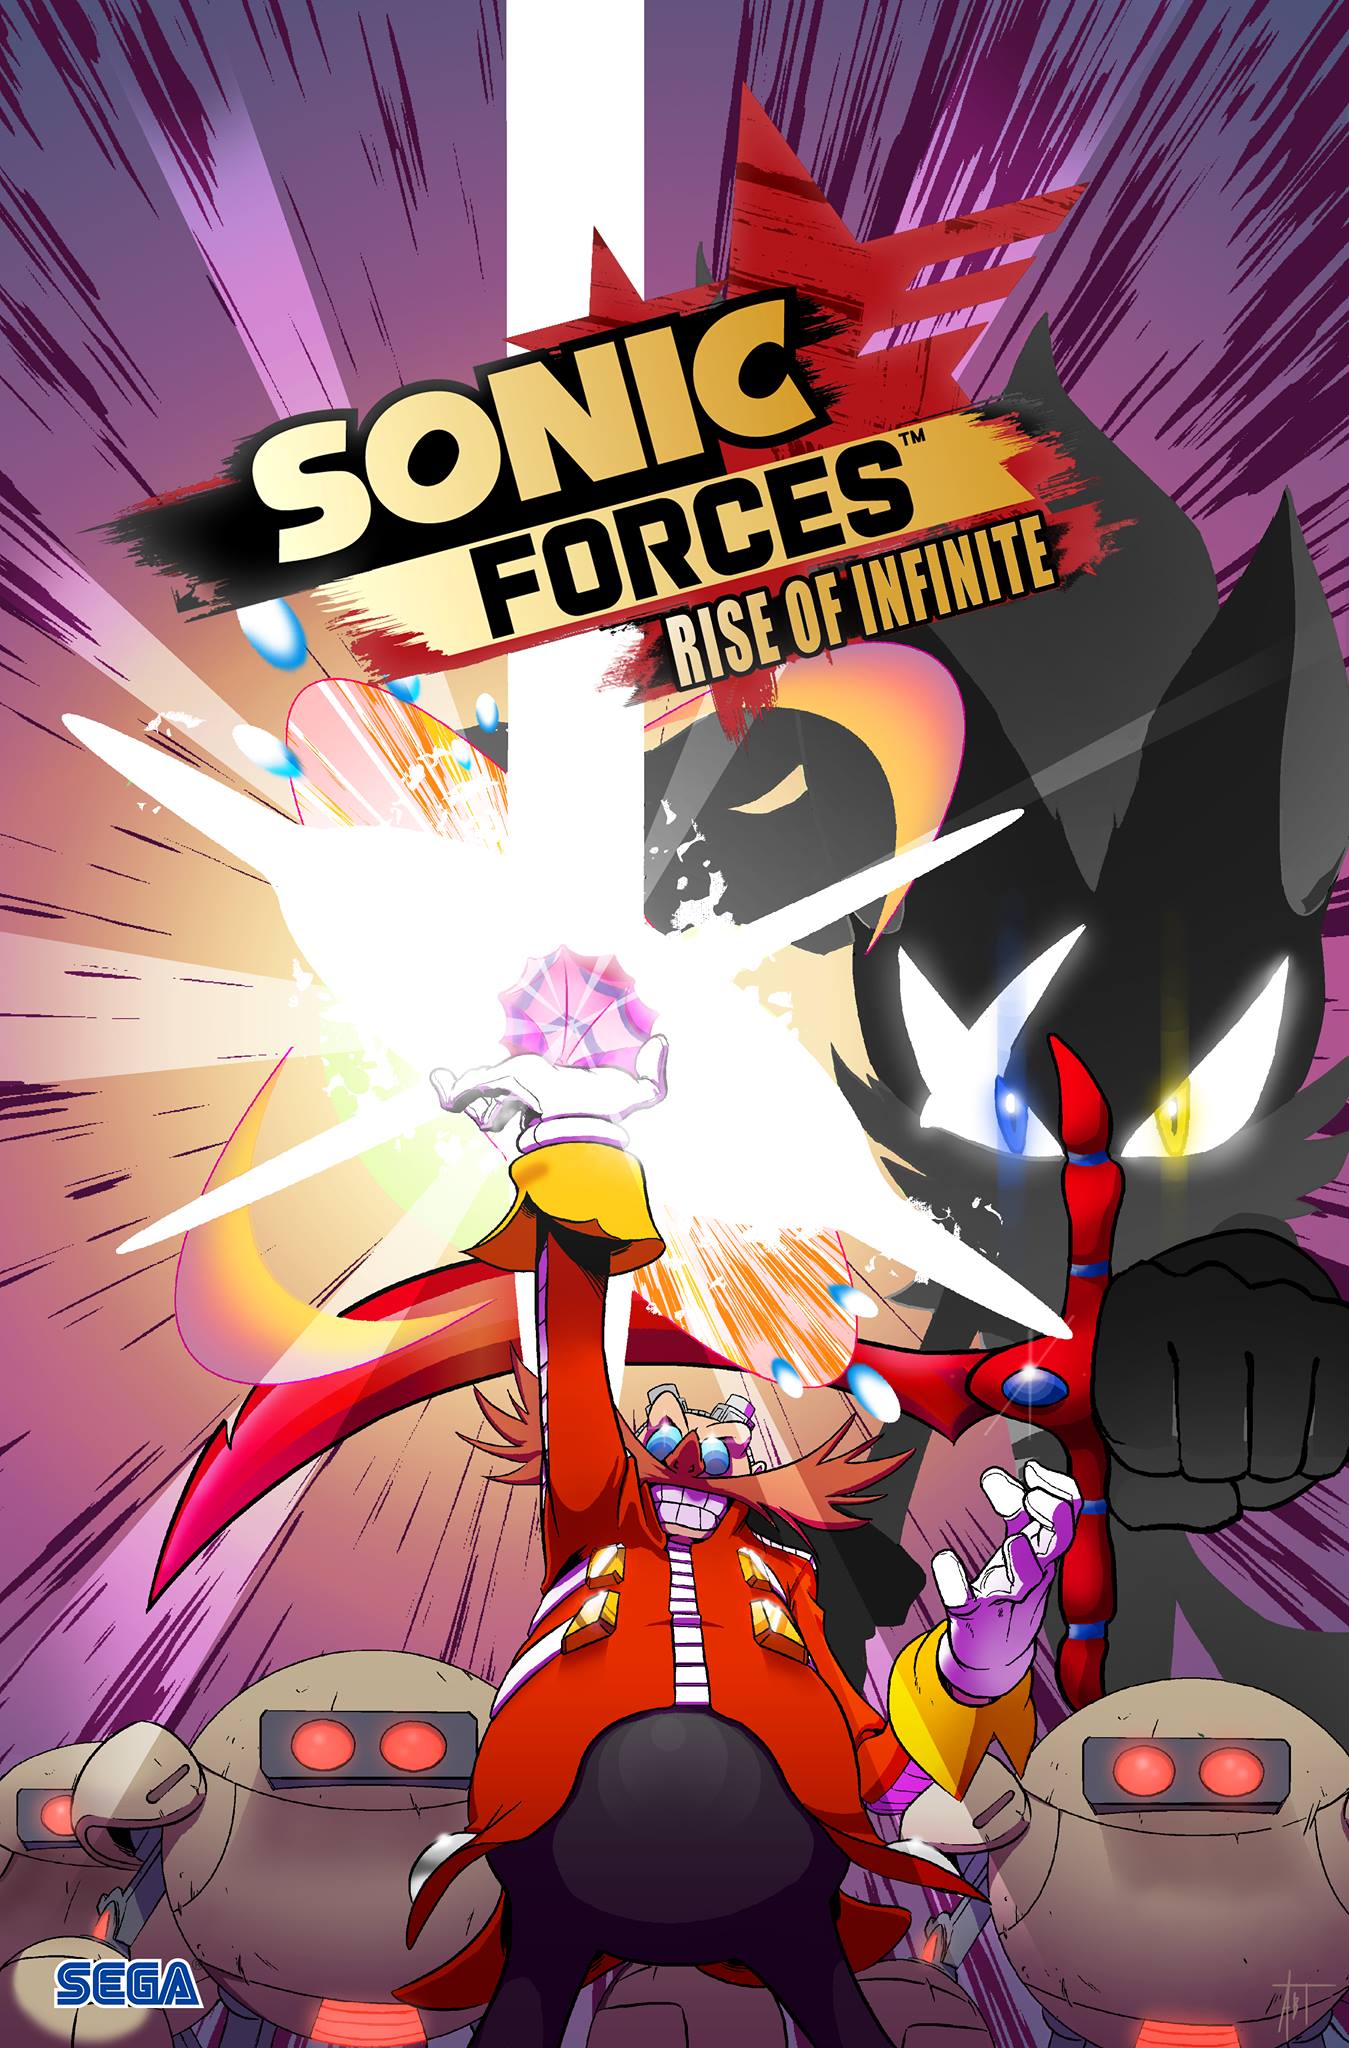 Sonic Forces digital comic showcases the “Rise of Infinite